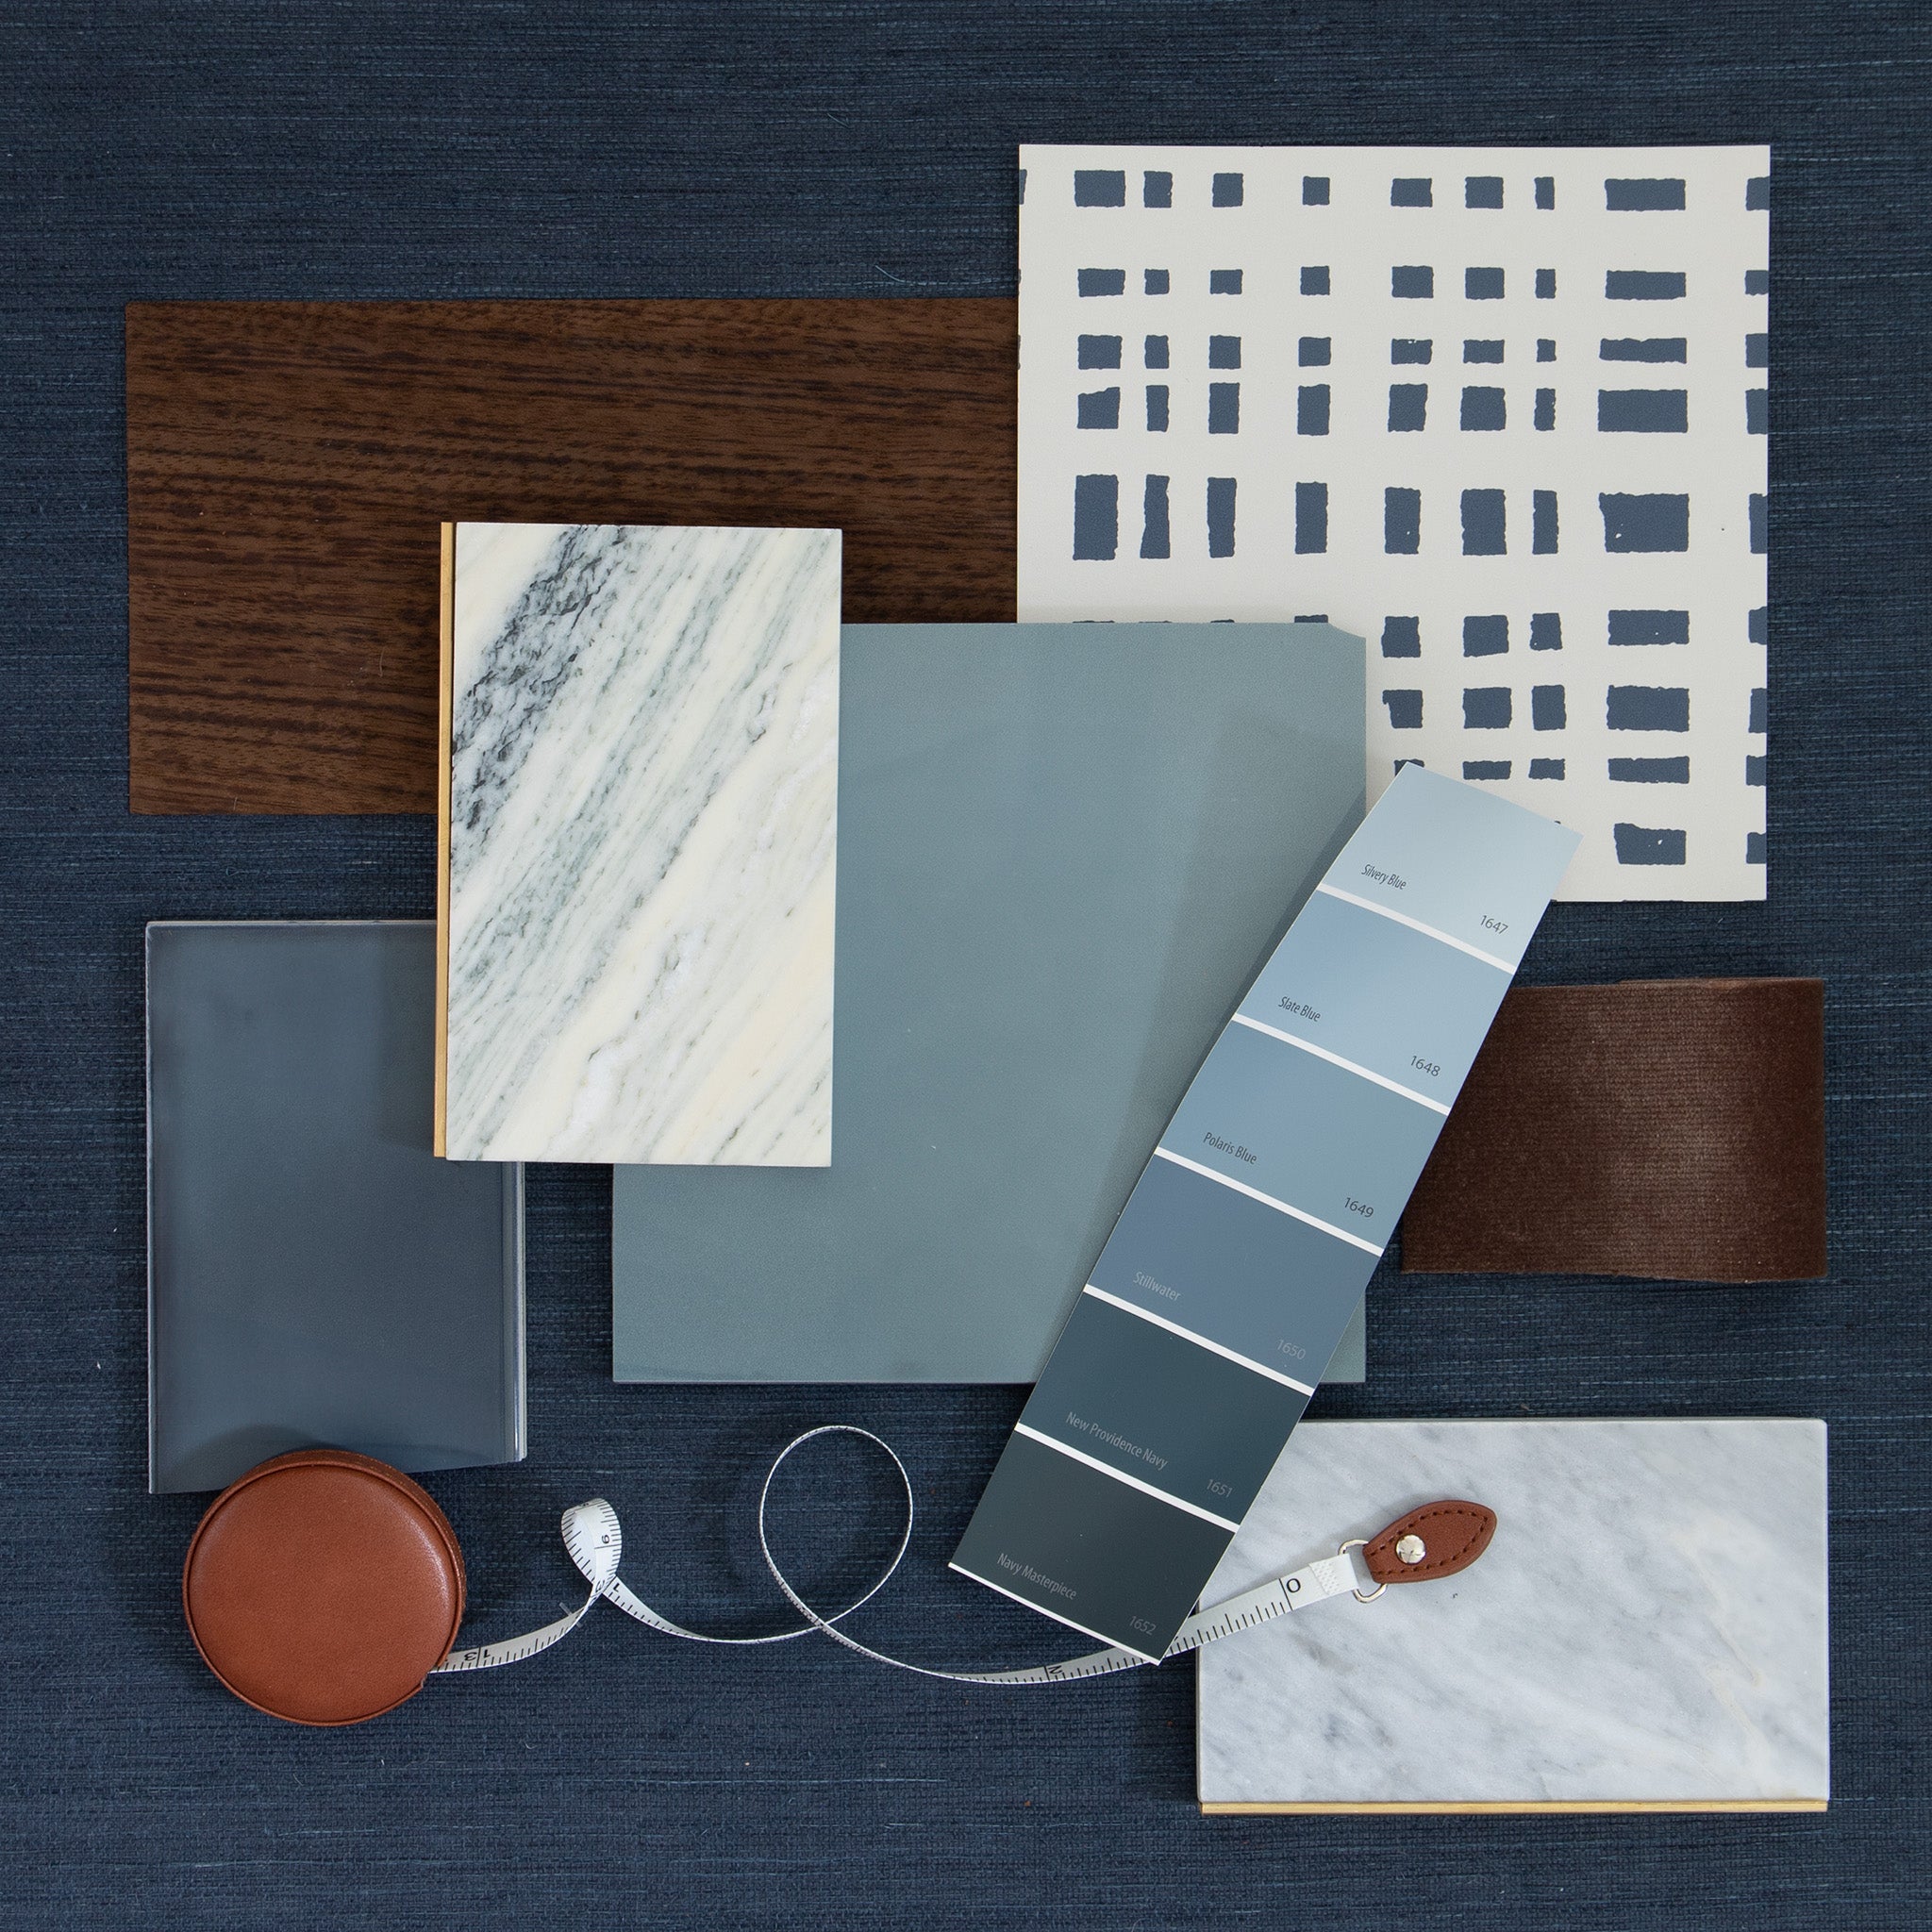 Interior design moodboard and wallpaper inspirations with blue paint and tile on top